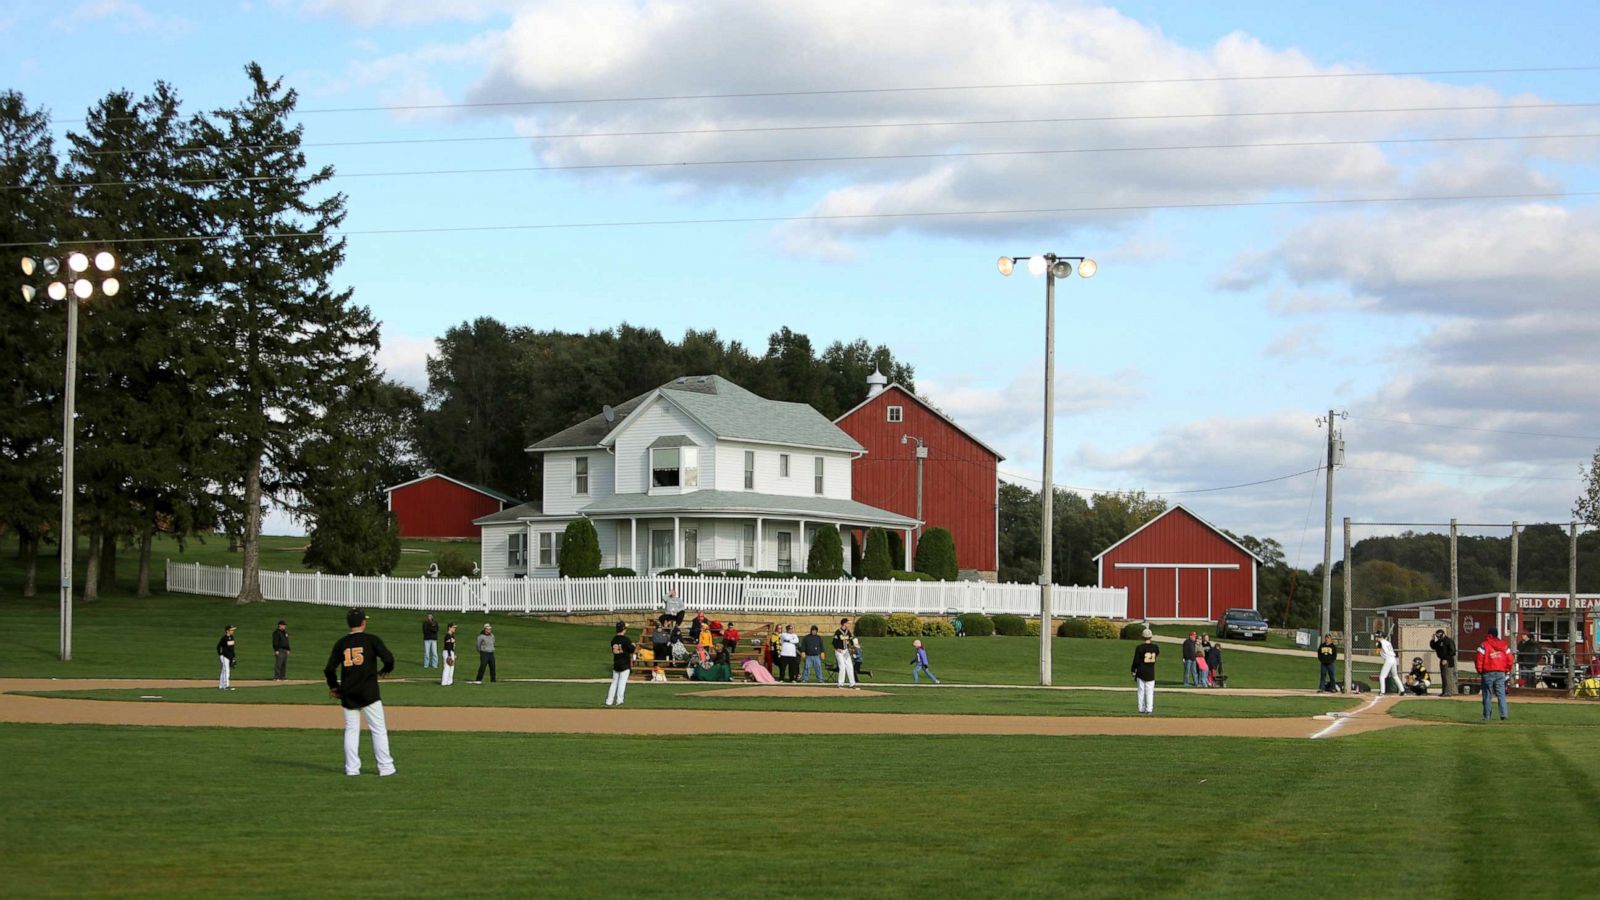 Yankees, White Sox to play game at 'Field of Dreams' in Iowa - ABC News